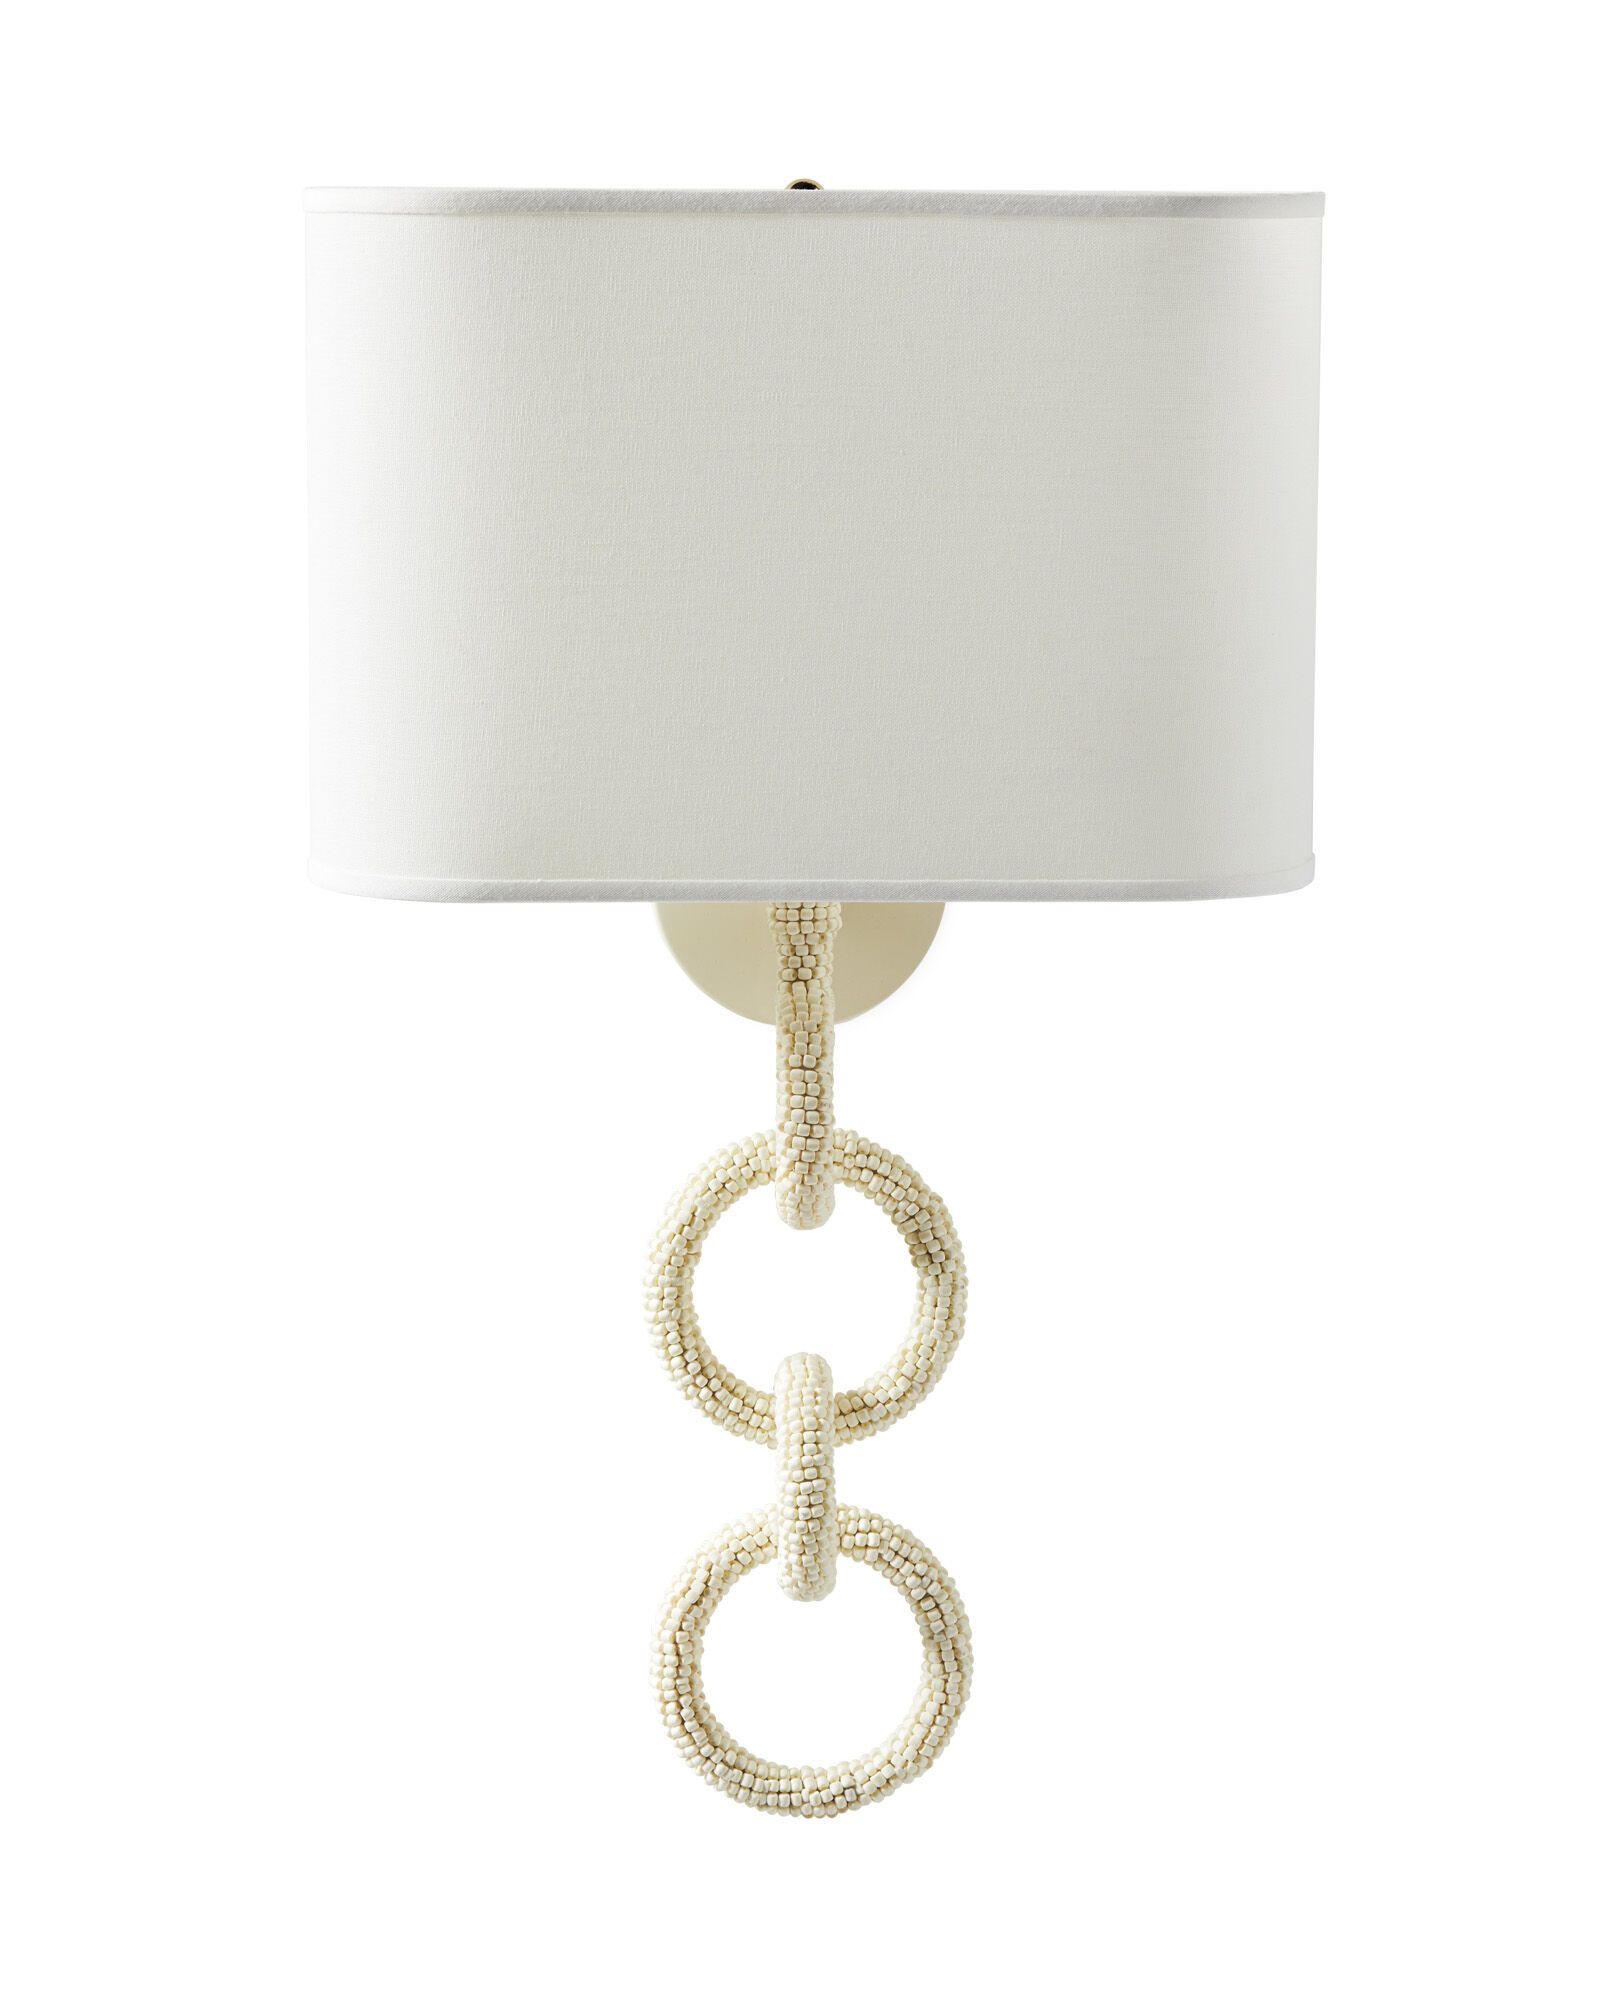 Del Sur Sconce | Serena and Lily